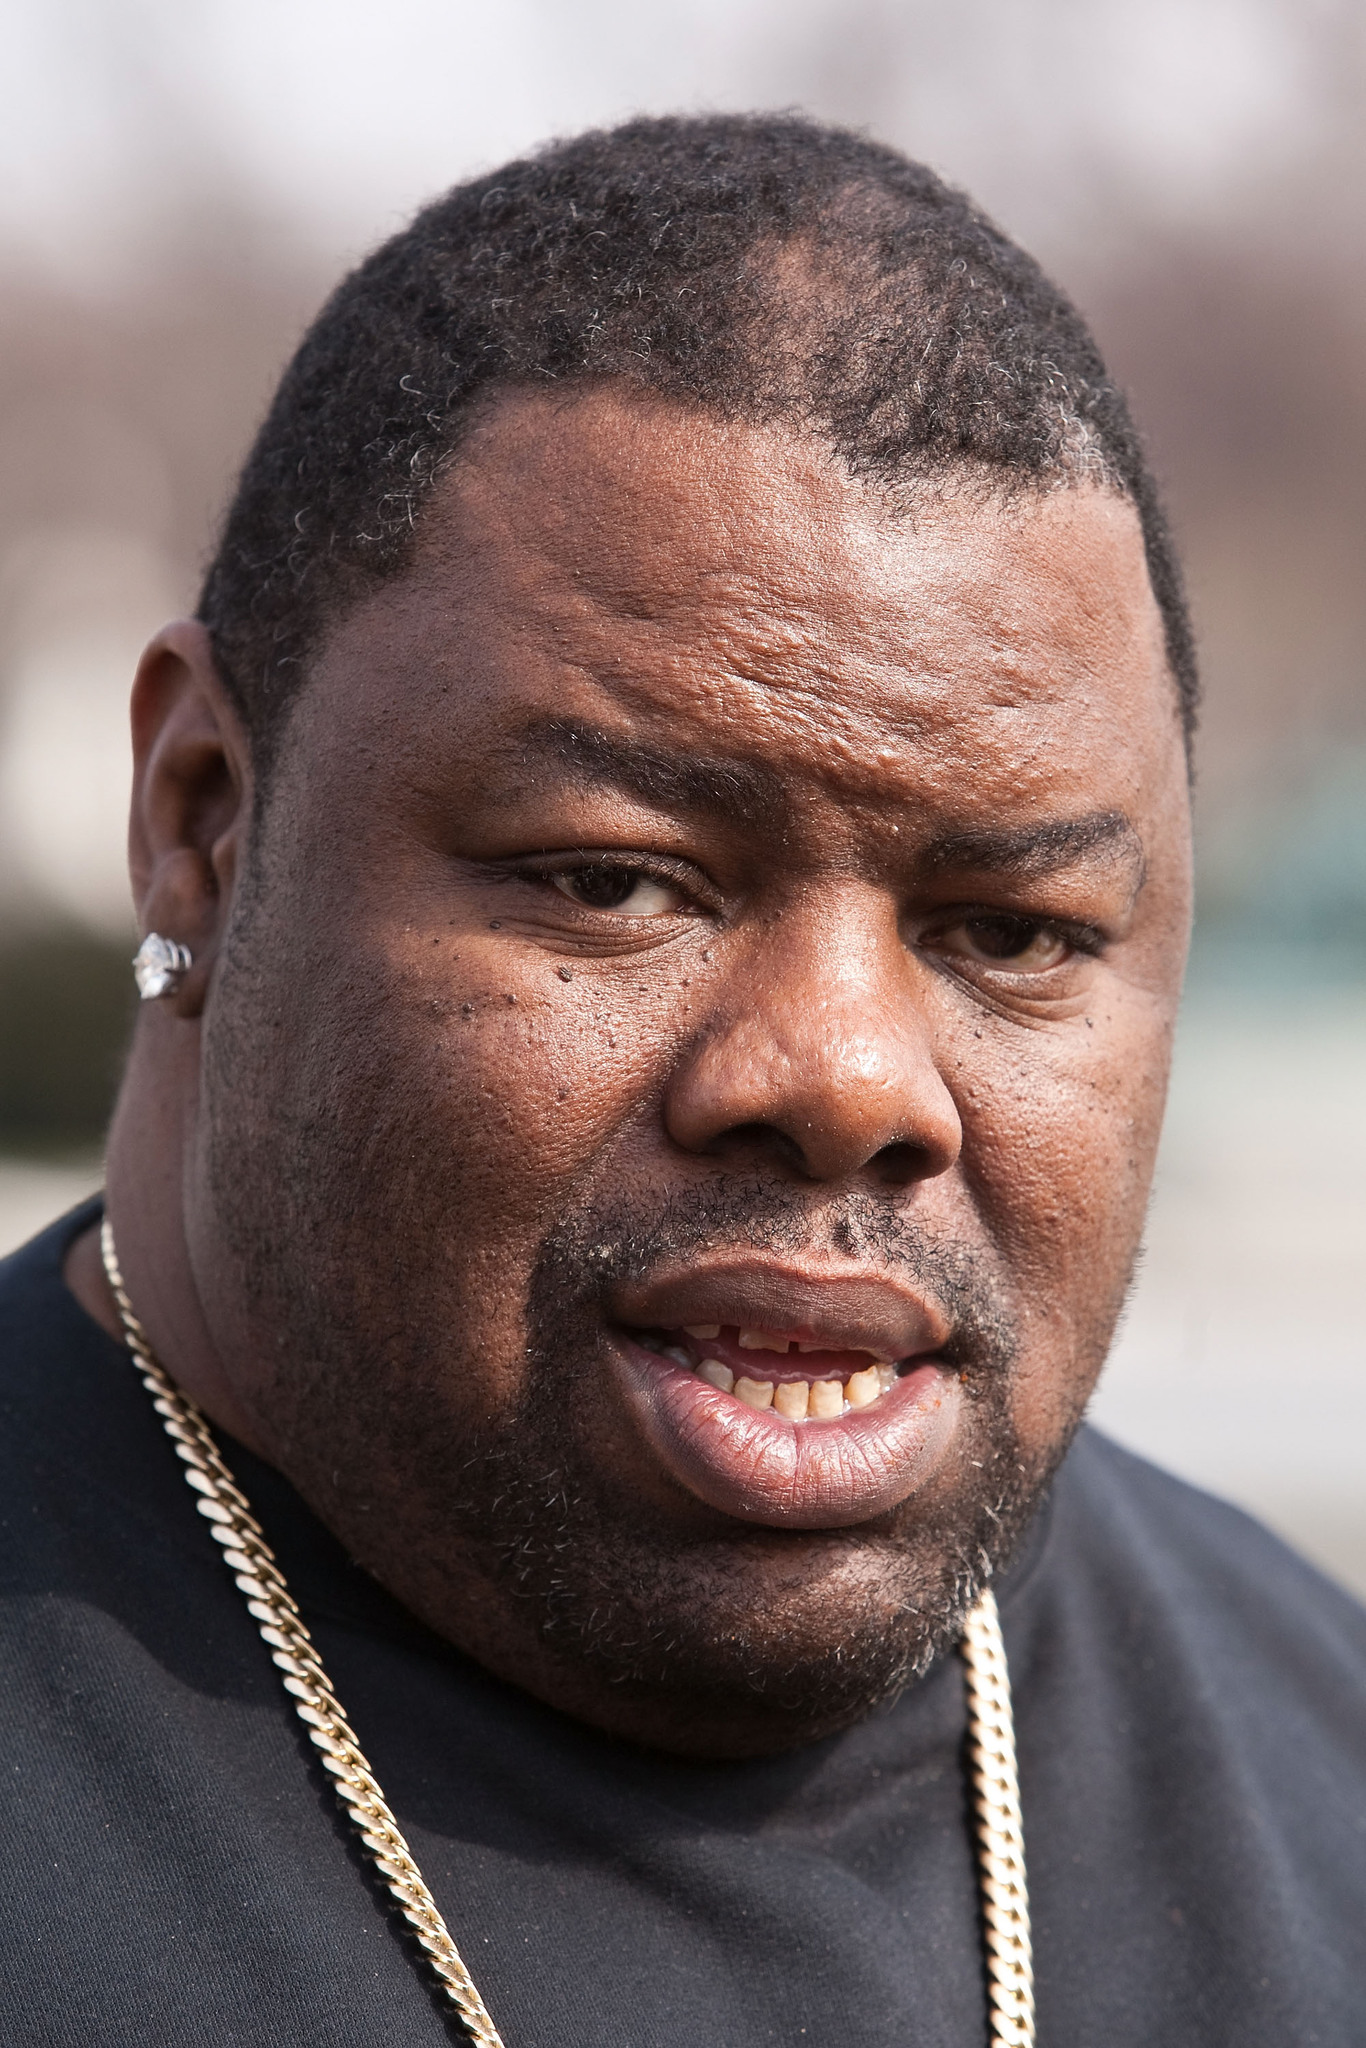 The 58-year old son of father (?) and mother(?) Biz Markie in 2022 photo. Biz Markie earned a  million dollar salary - leaving the net worth at  million in 2022